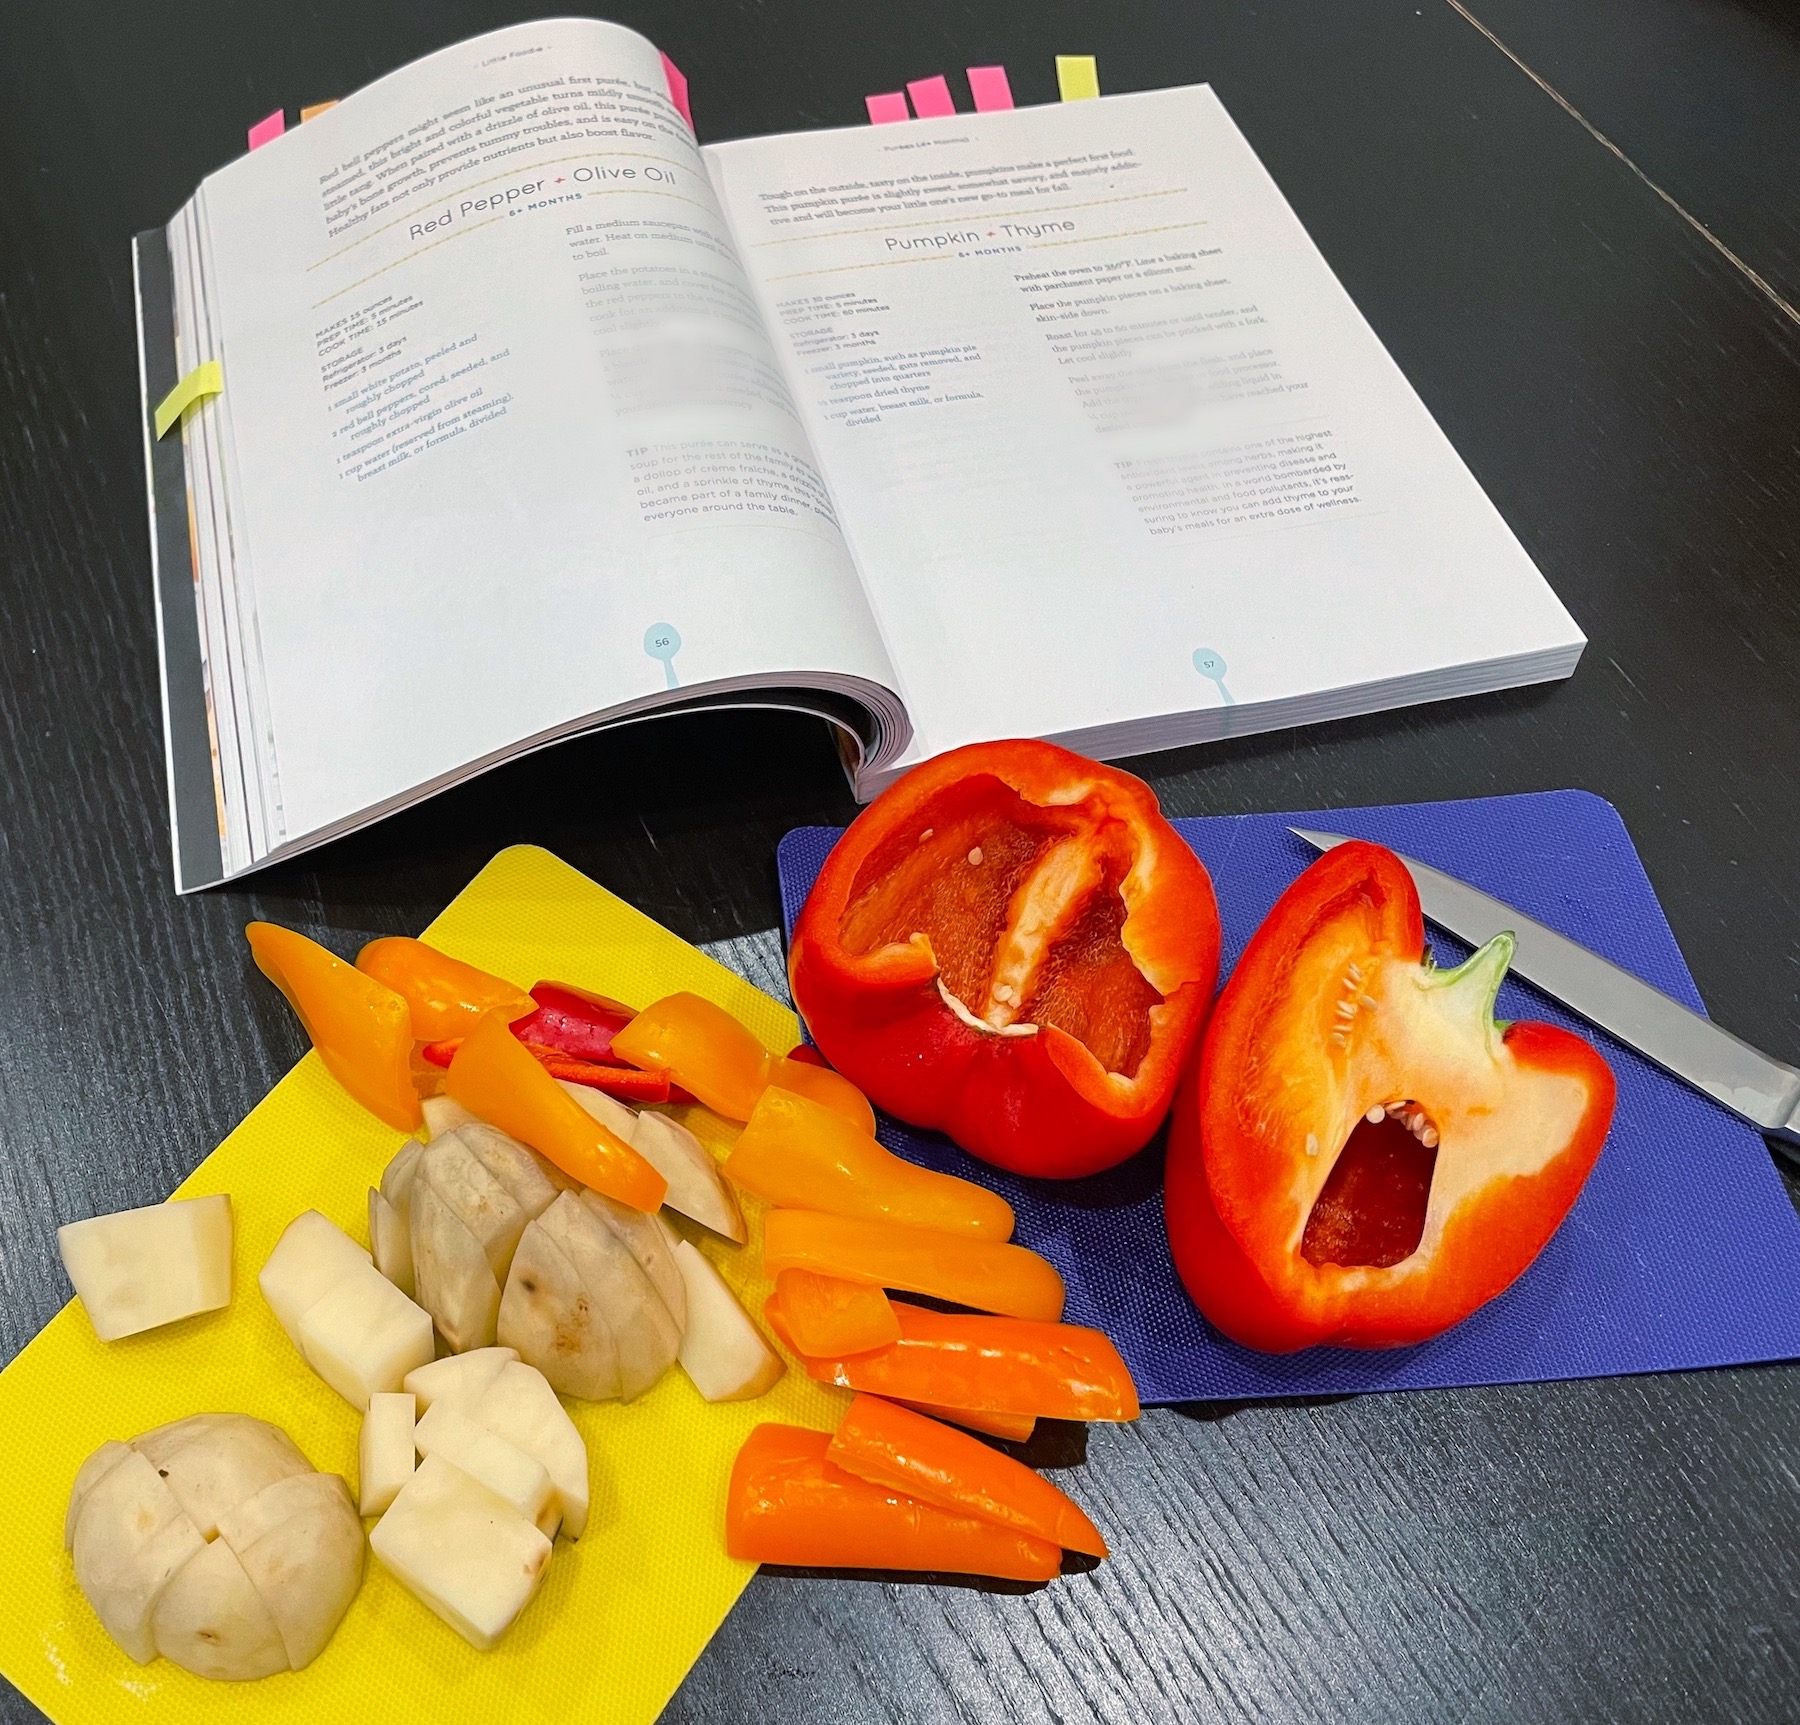 Little Foodie Cookbook Recipe for a Red Pepper Puree with red peppers and potatoes being chopped